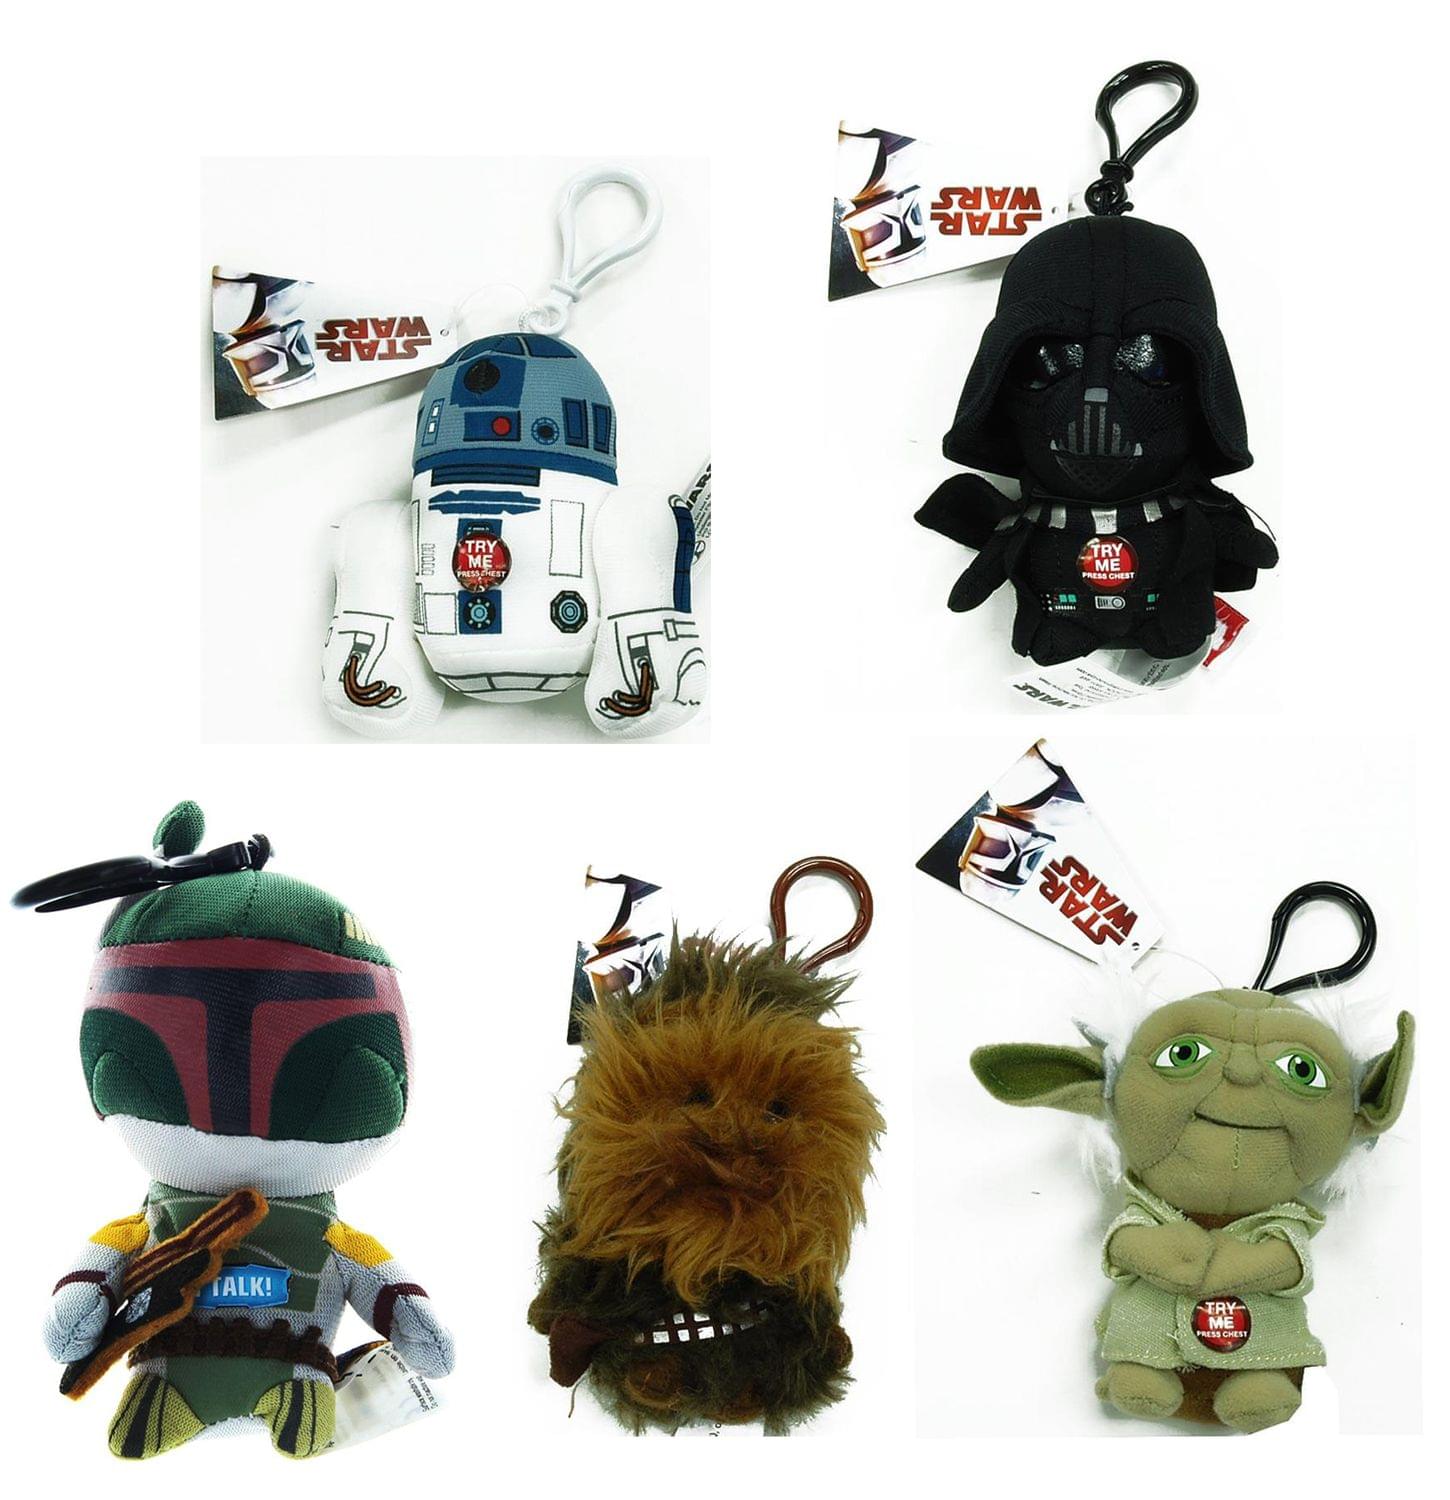 Star Wars 4" Talking Plush Clip On Set of 5 with R2-D2, Yoda, Vader & More